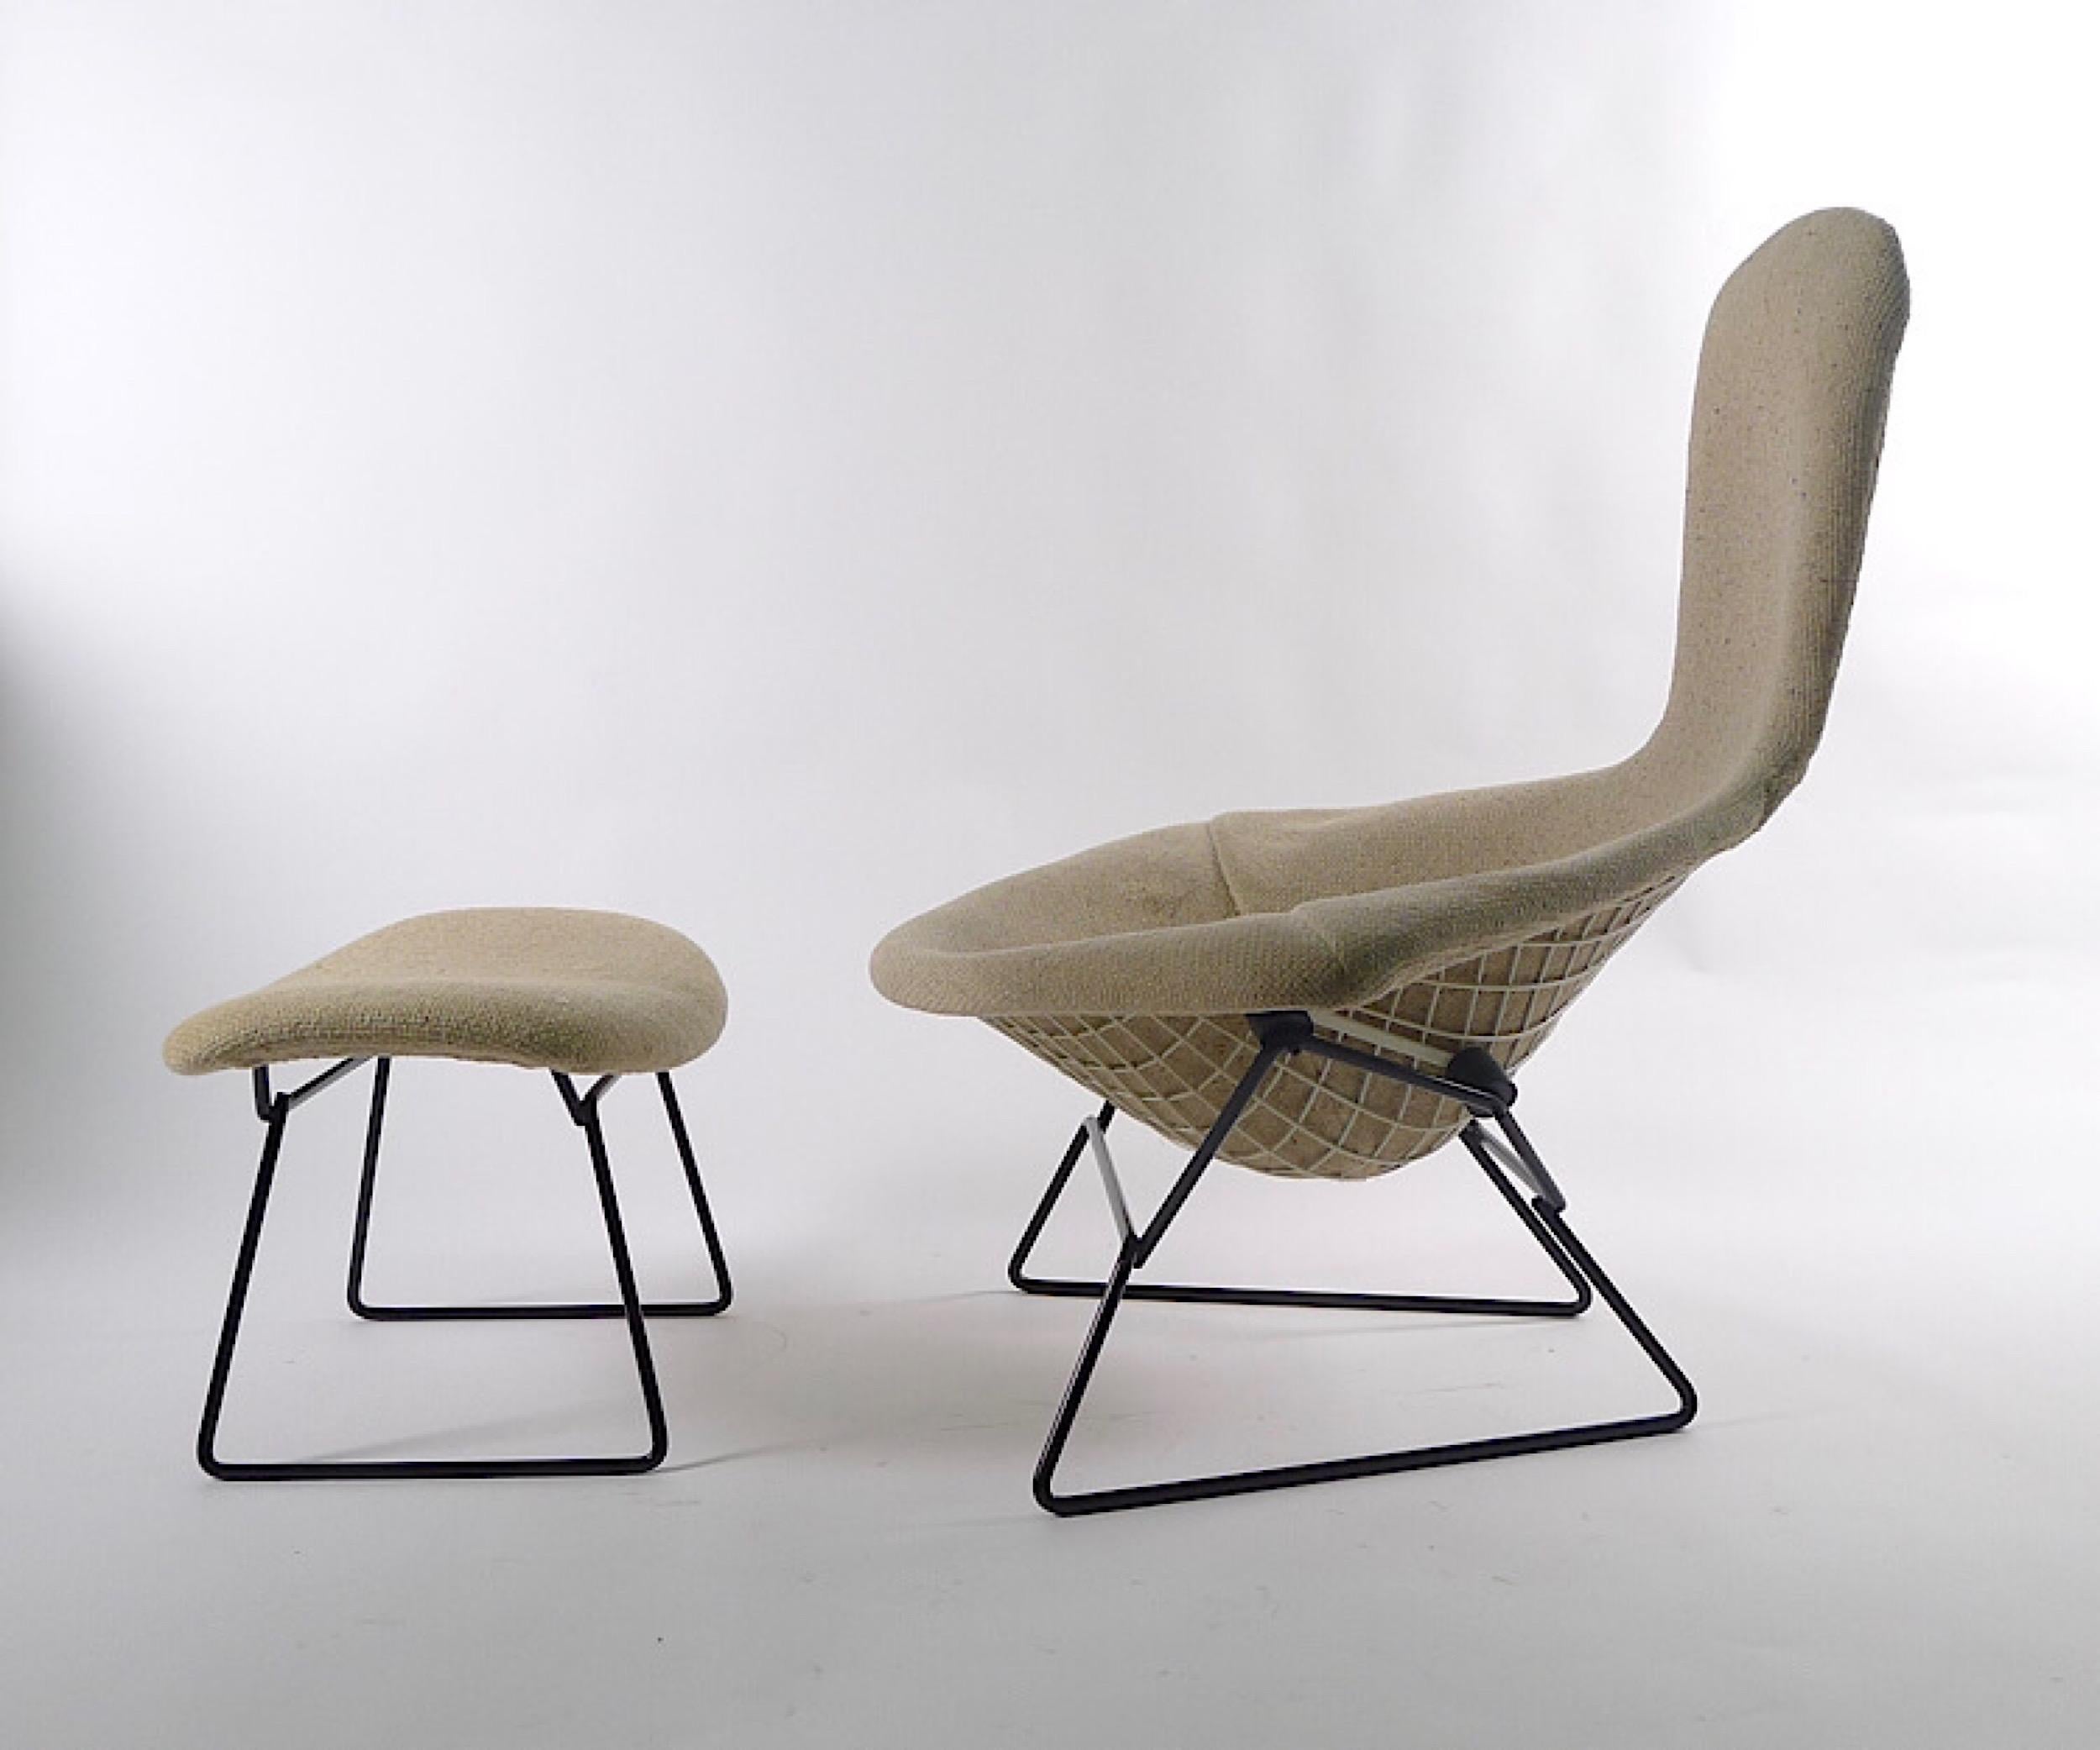 20th Century Harry Bertoia Bird Chair and Ottoman, 1st Series, Made by Knoll International